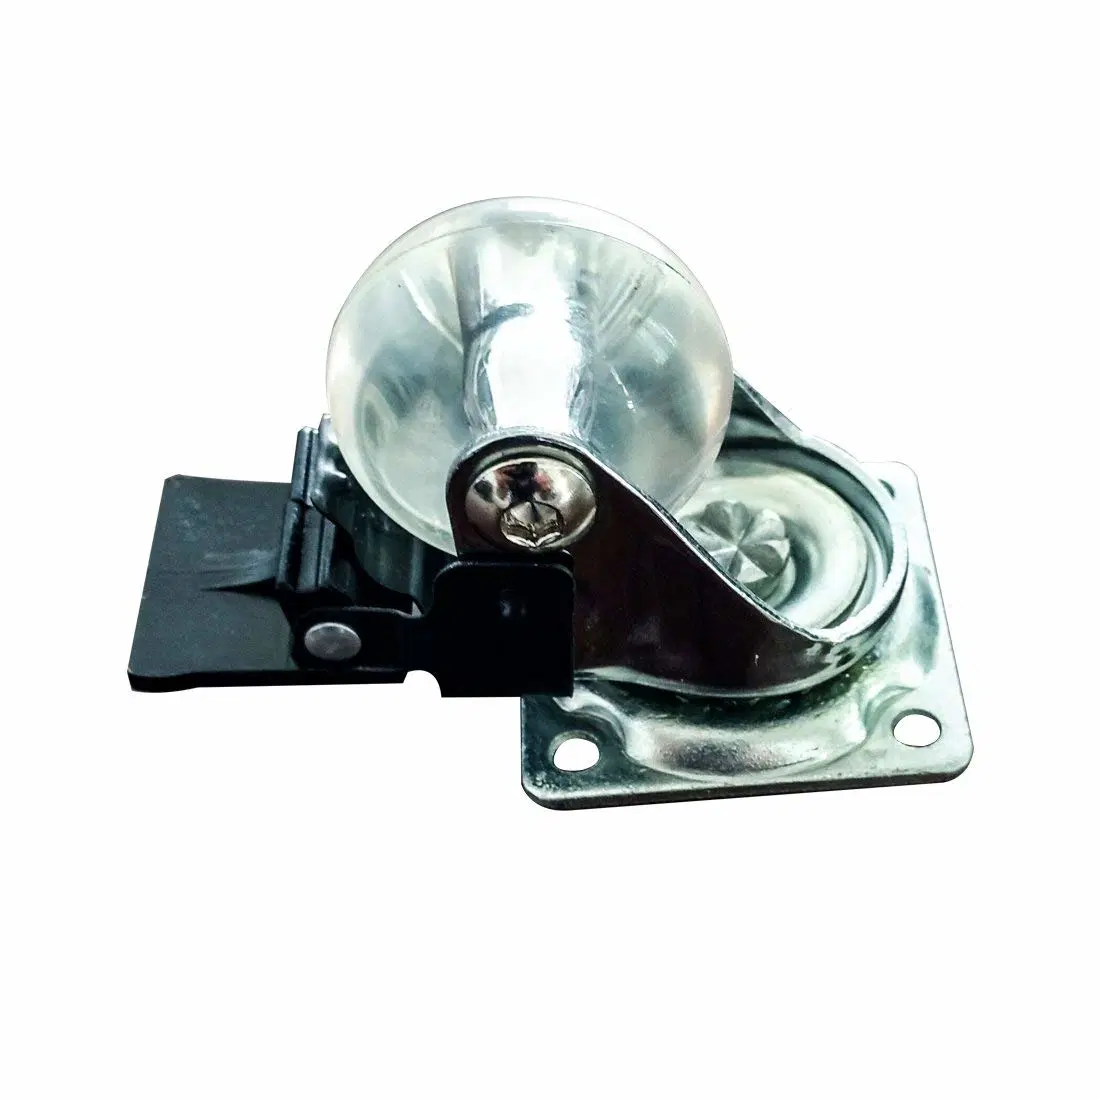 Transparent Furniture Caster 1.5 Inch Castor Wheel Using for a Multitude of Applications Caster Wheels with Brake